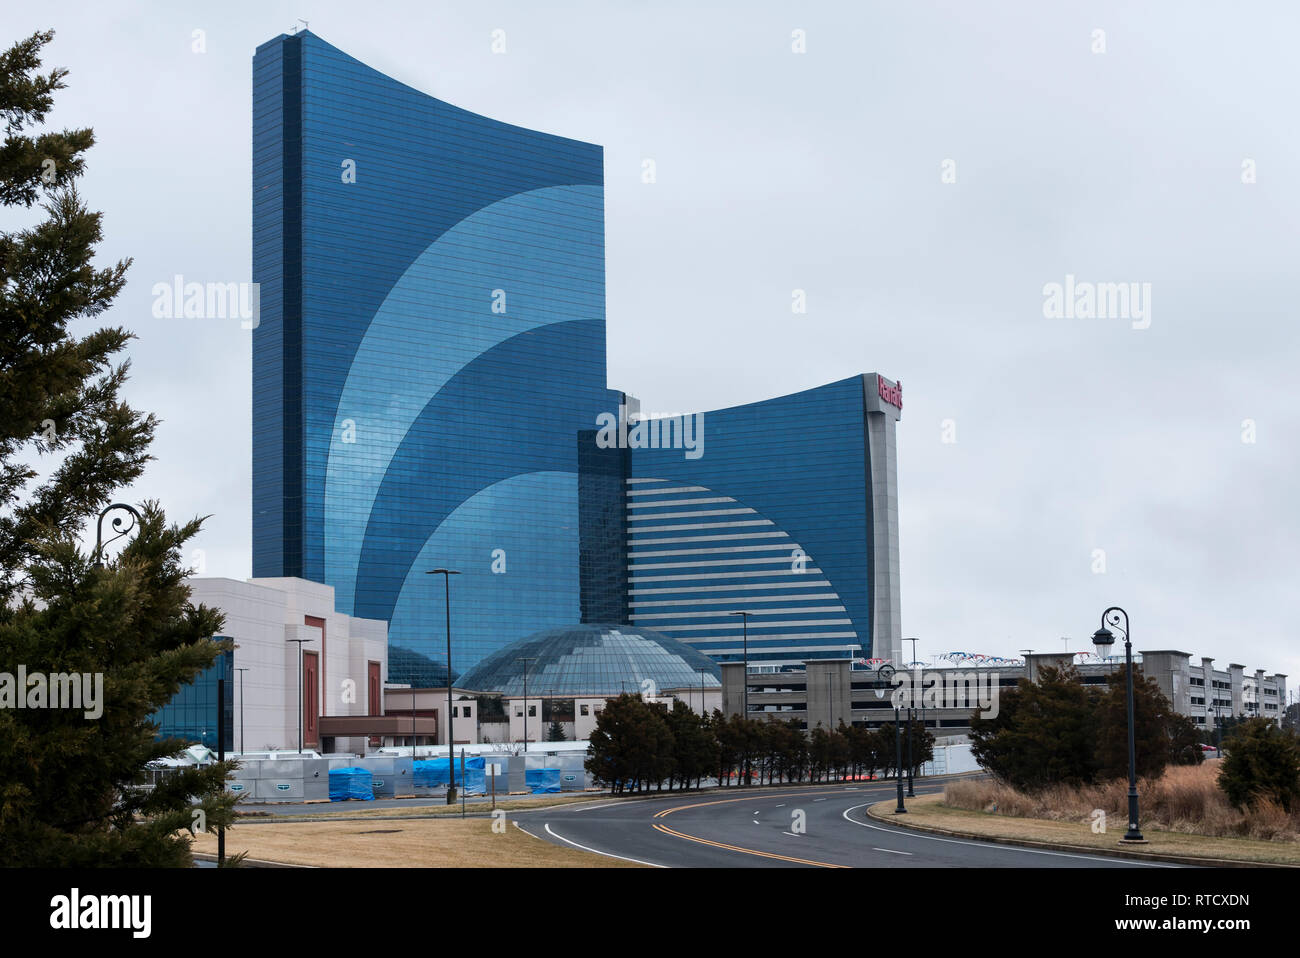 Atlantic City, NJ, USA - 20 February 2018: Harrahs hotel and casino indoor pool with a sun dome is the reason many people come to Atlantic City during Stock Photo